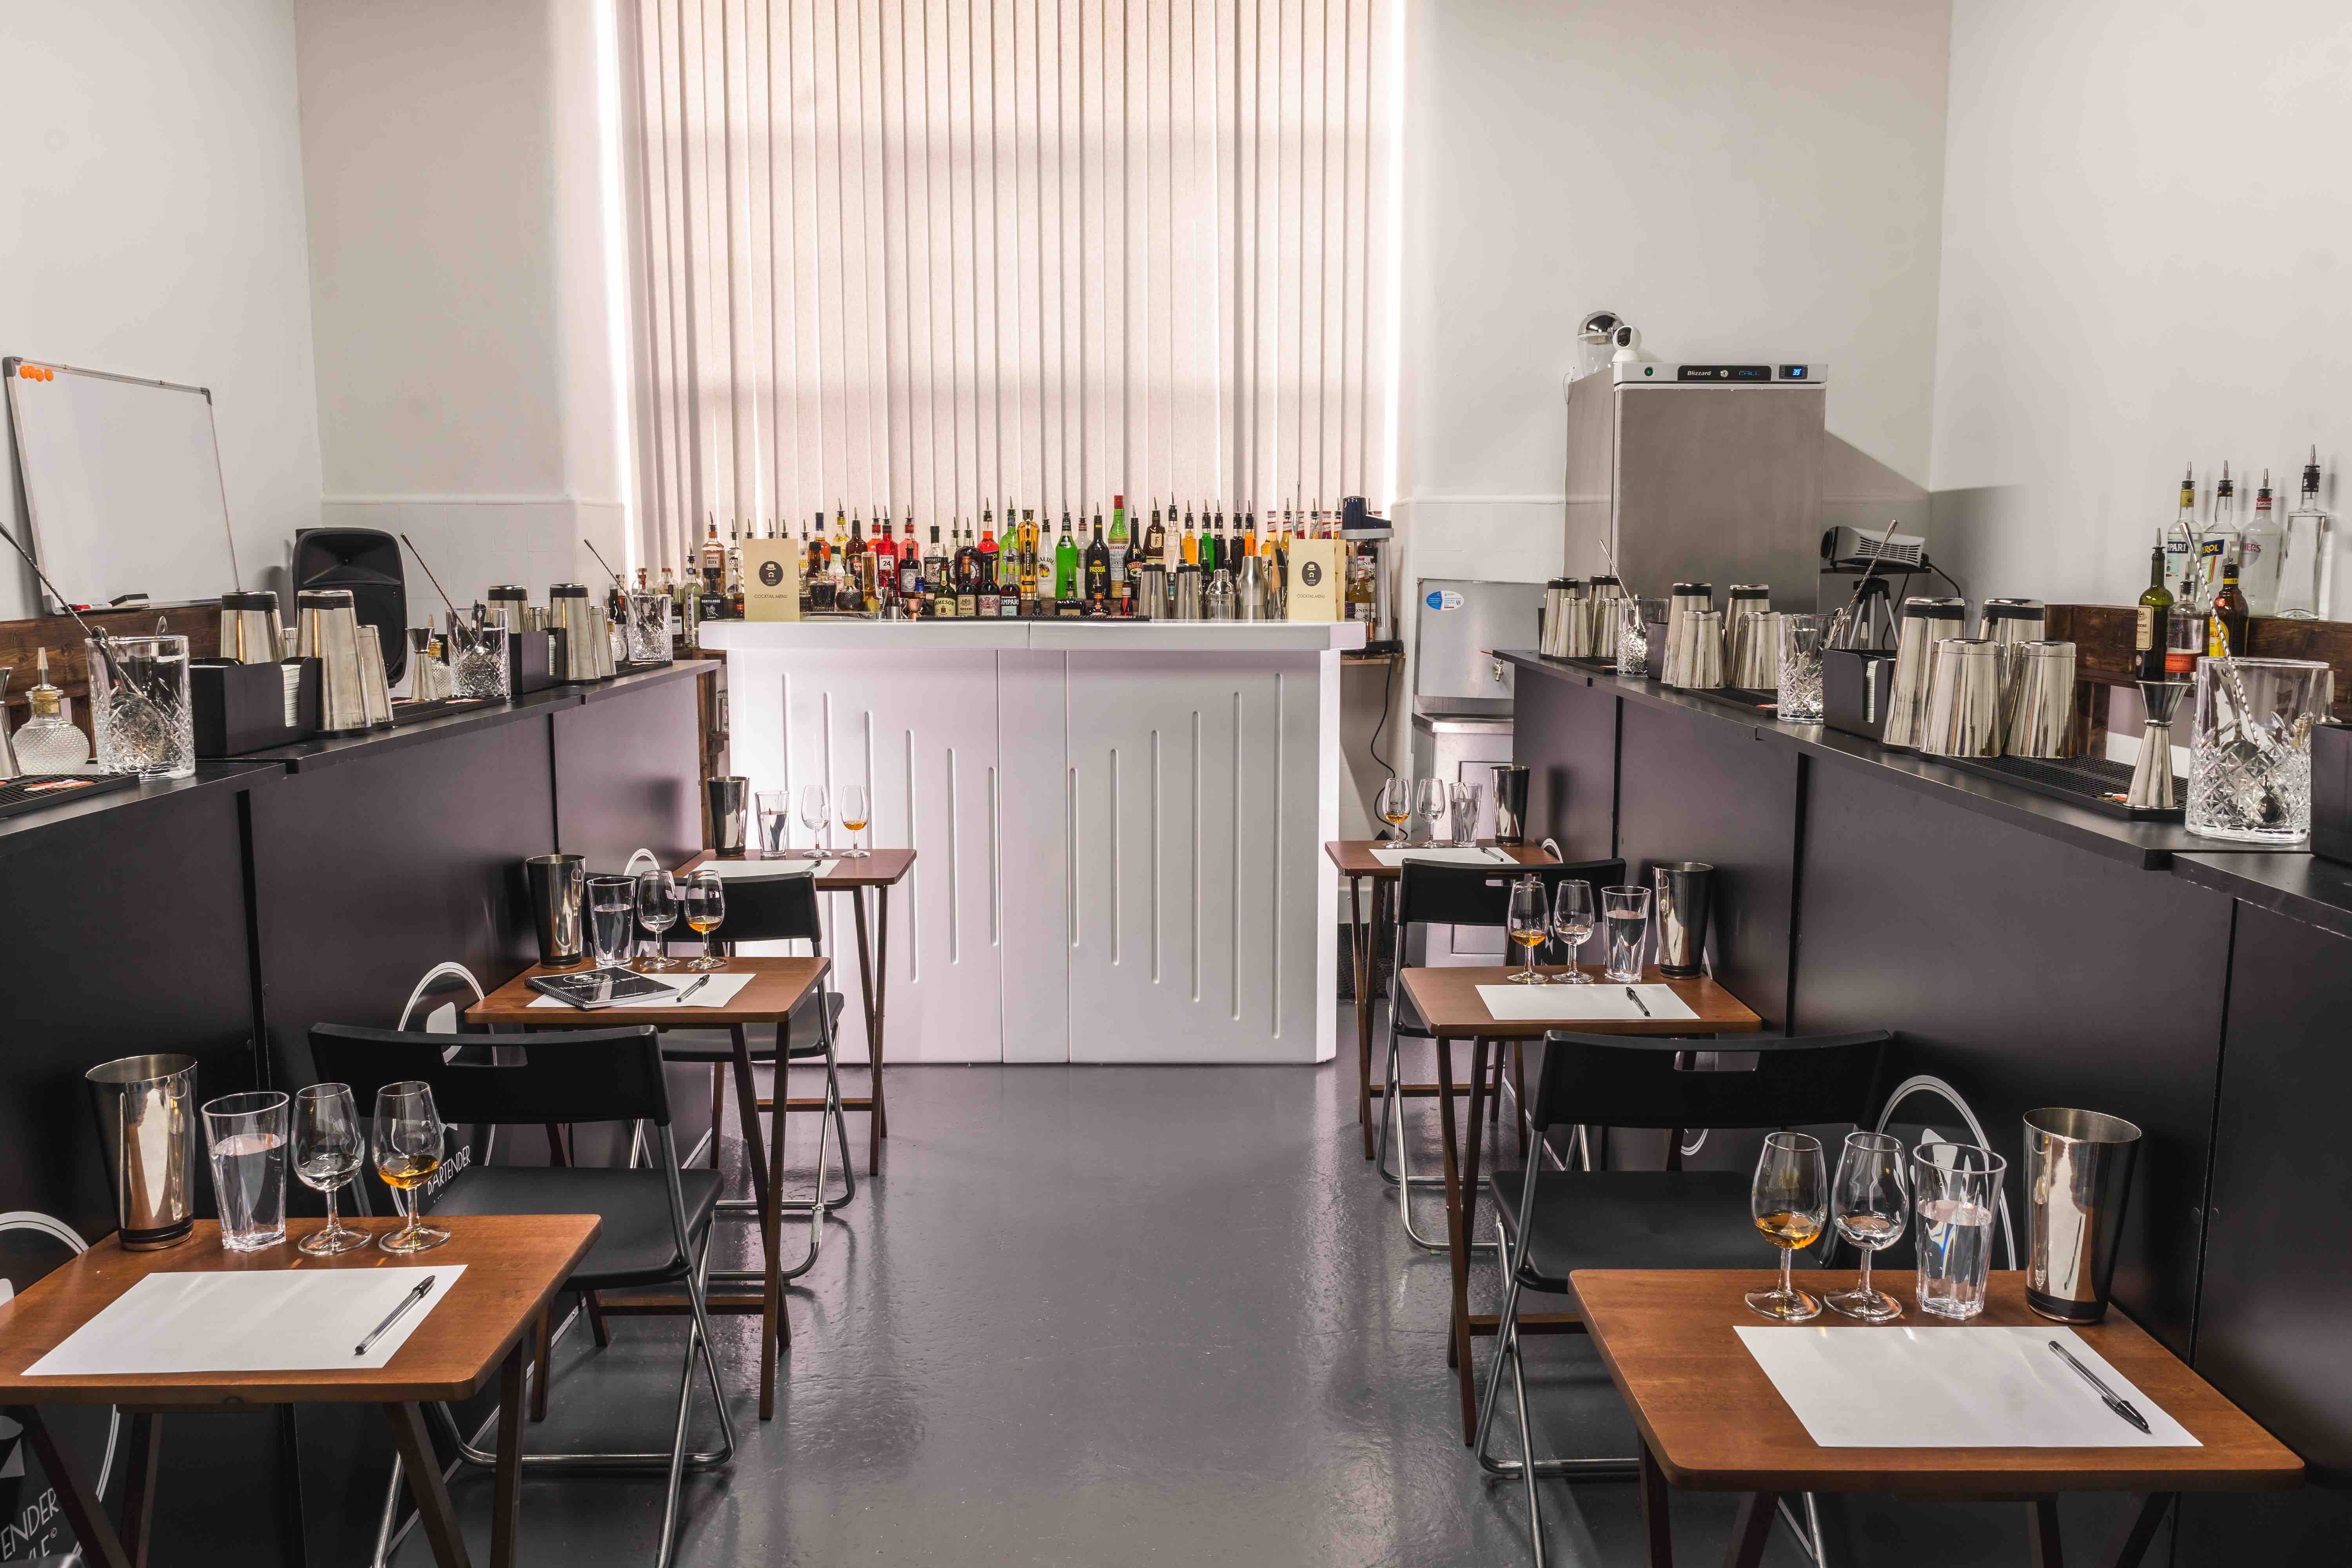 6 tables with set up for the wset lv2 course with glasses and study materials